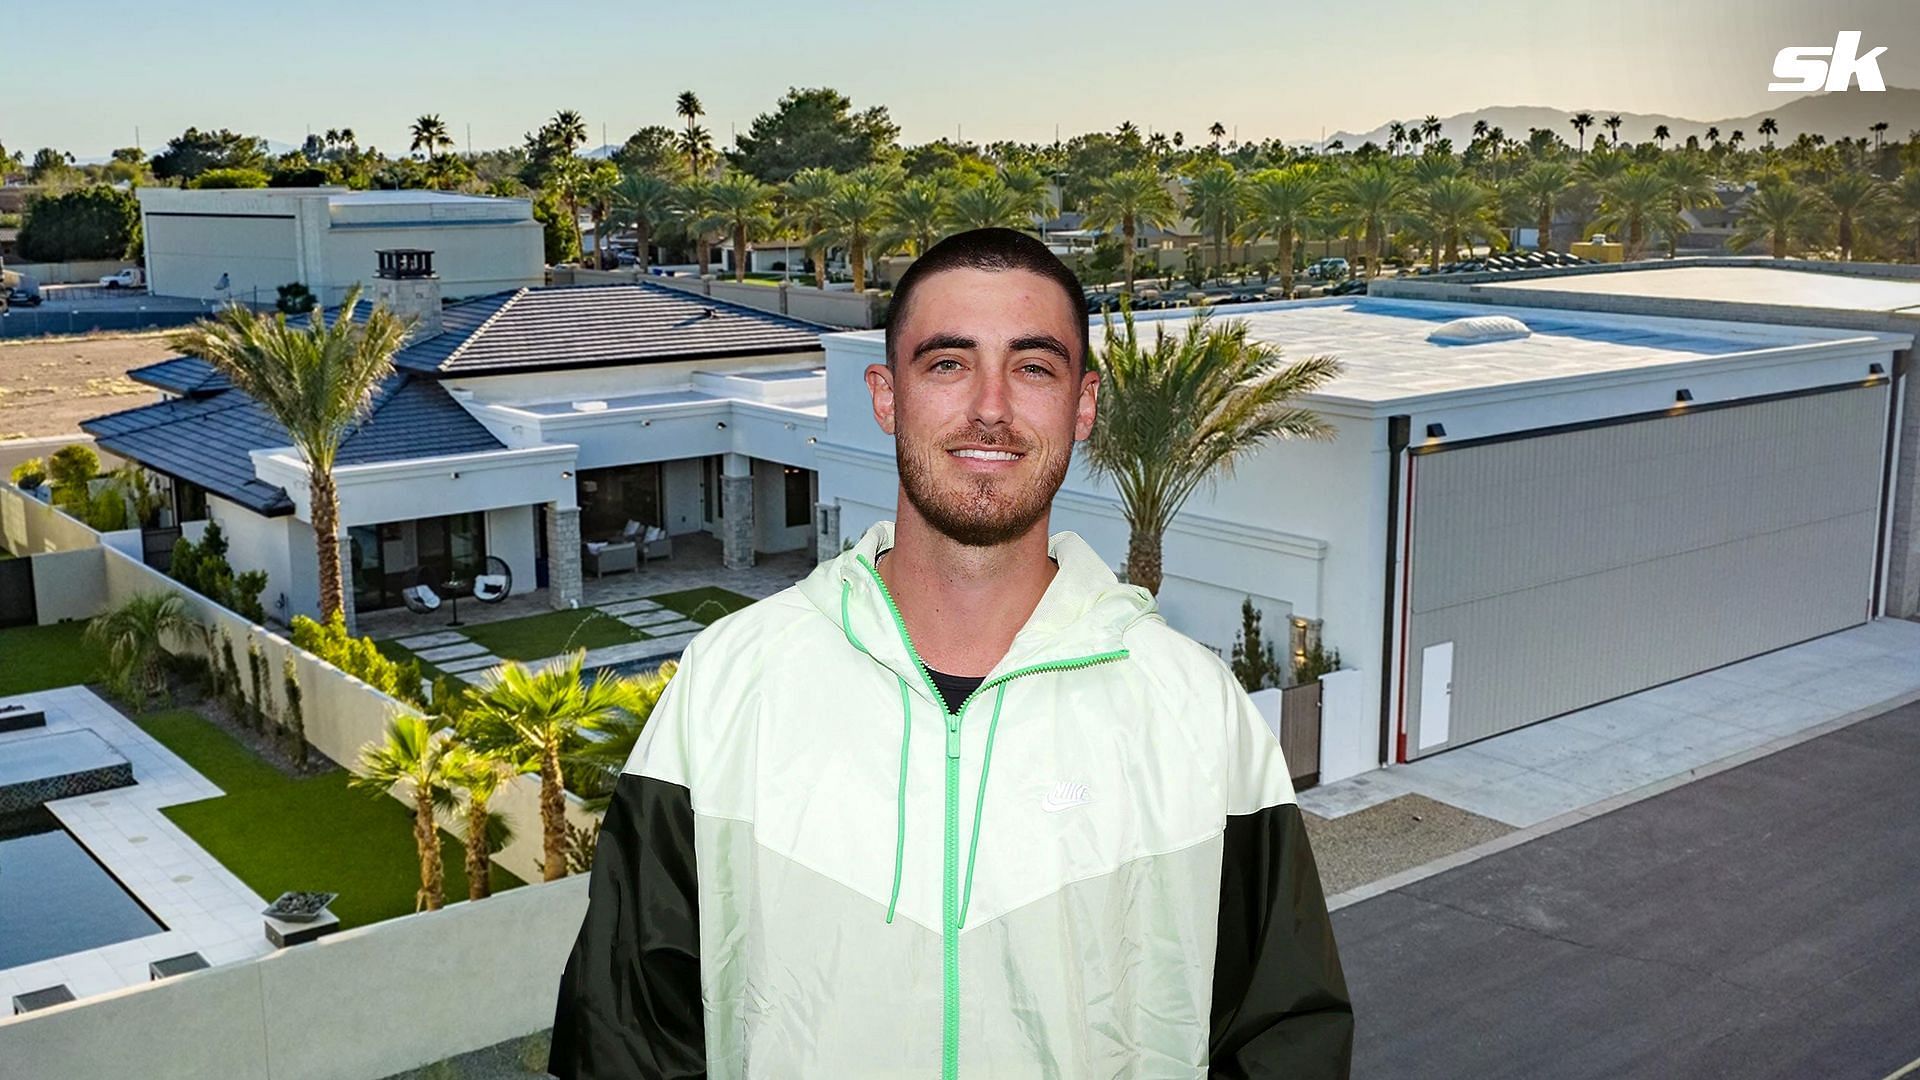 Cody Bellinger sold his sprawling Arizona mansion for $3.9 million in 2022